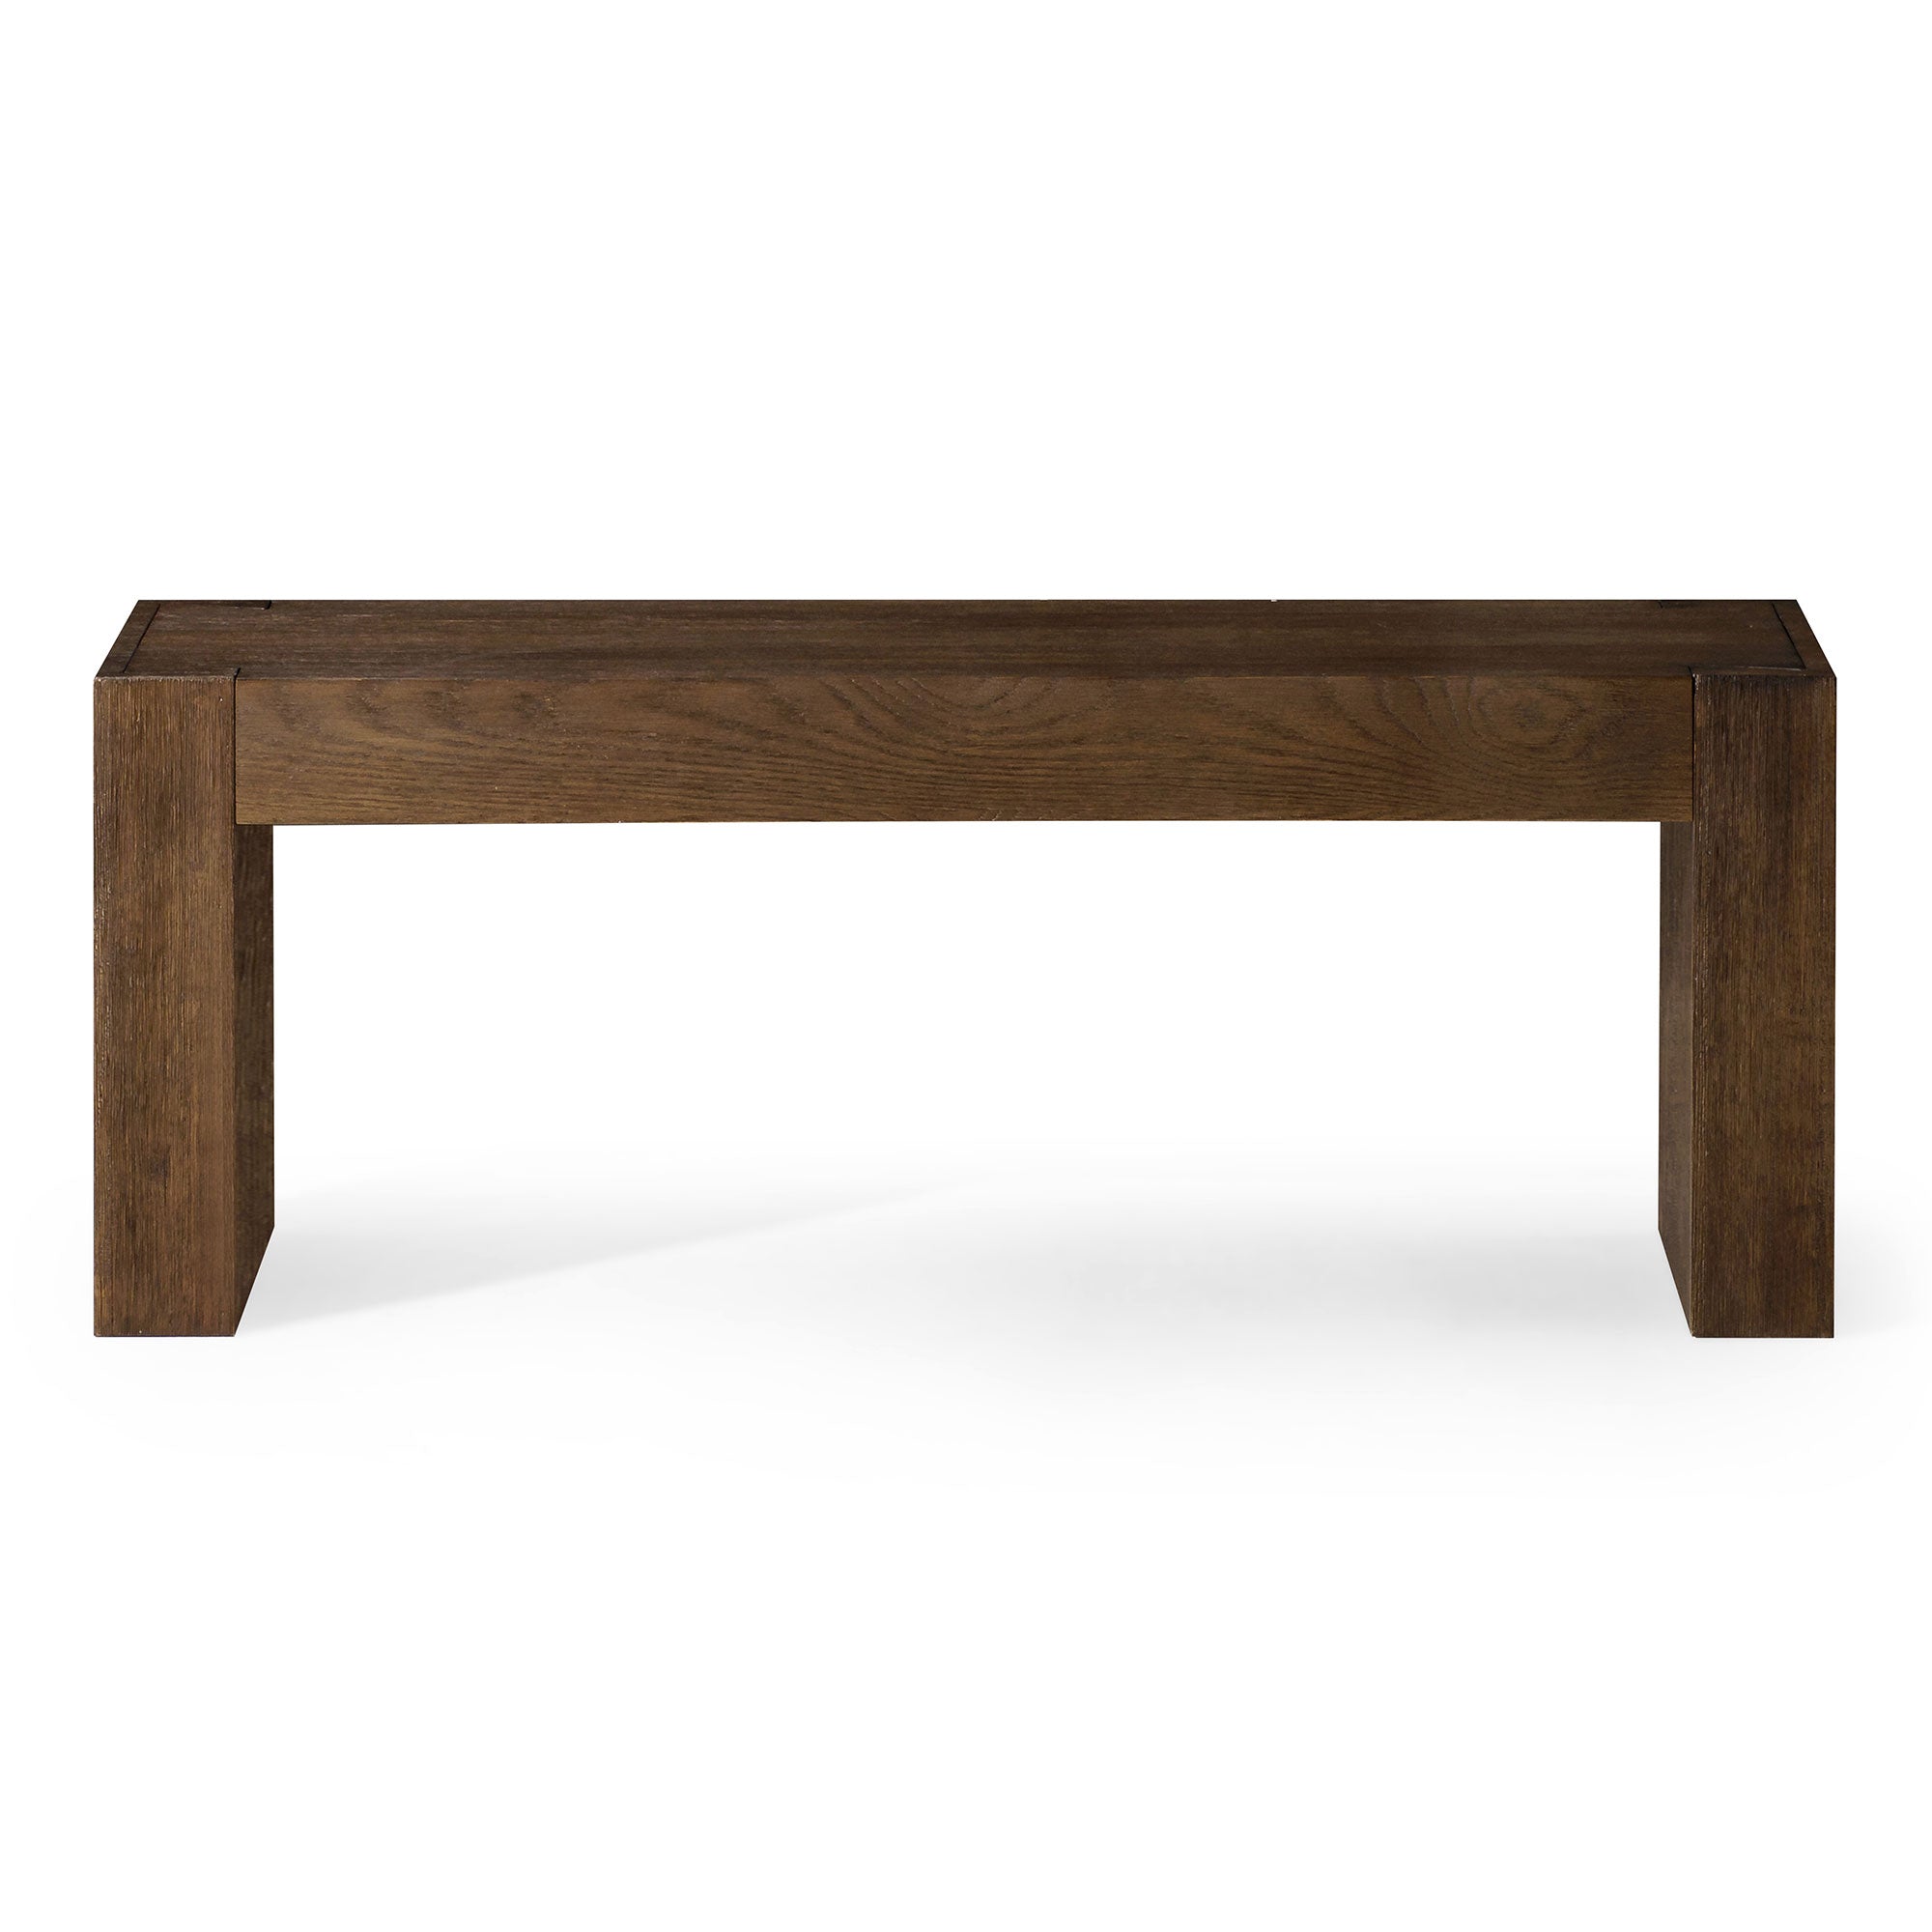 Zeno Contemporary Wooden Bench in Weathered Brown Finish